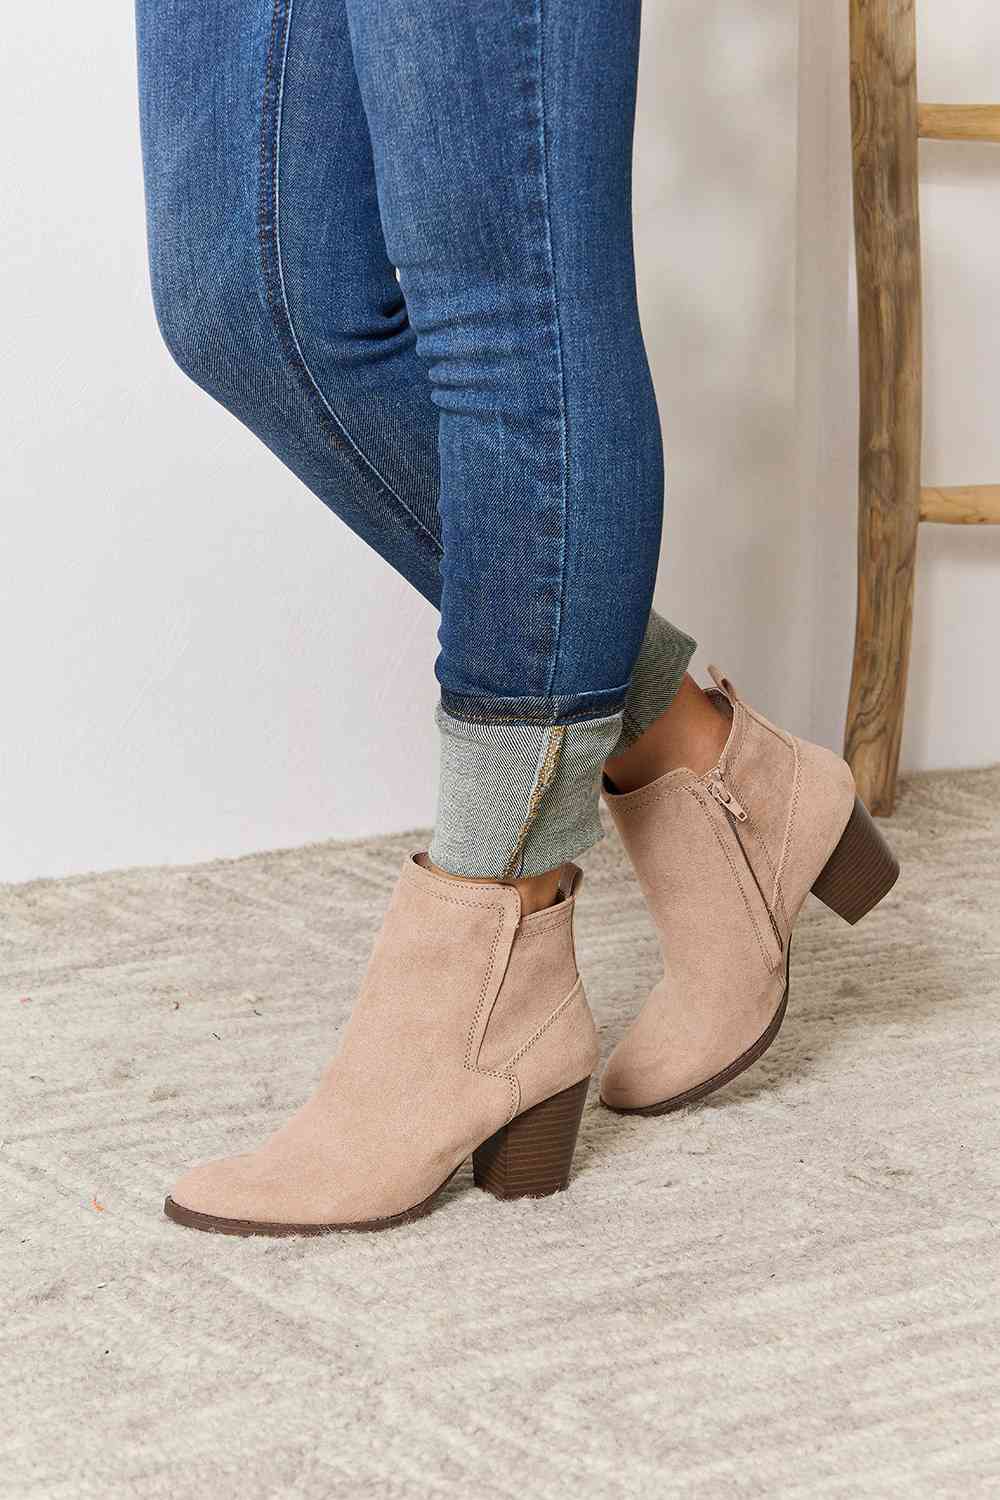 East Lion Corp Block Heel Point Toe Ankle Boots - Fashion Girl Online Store